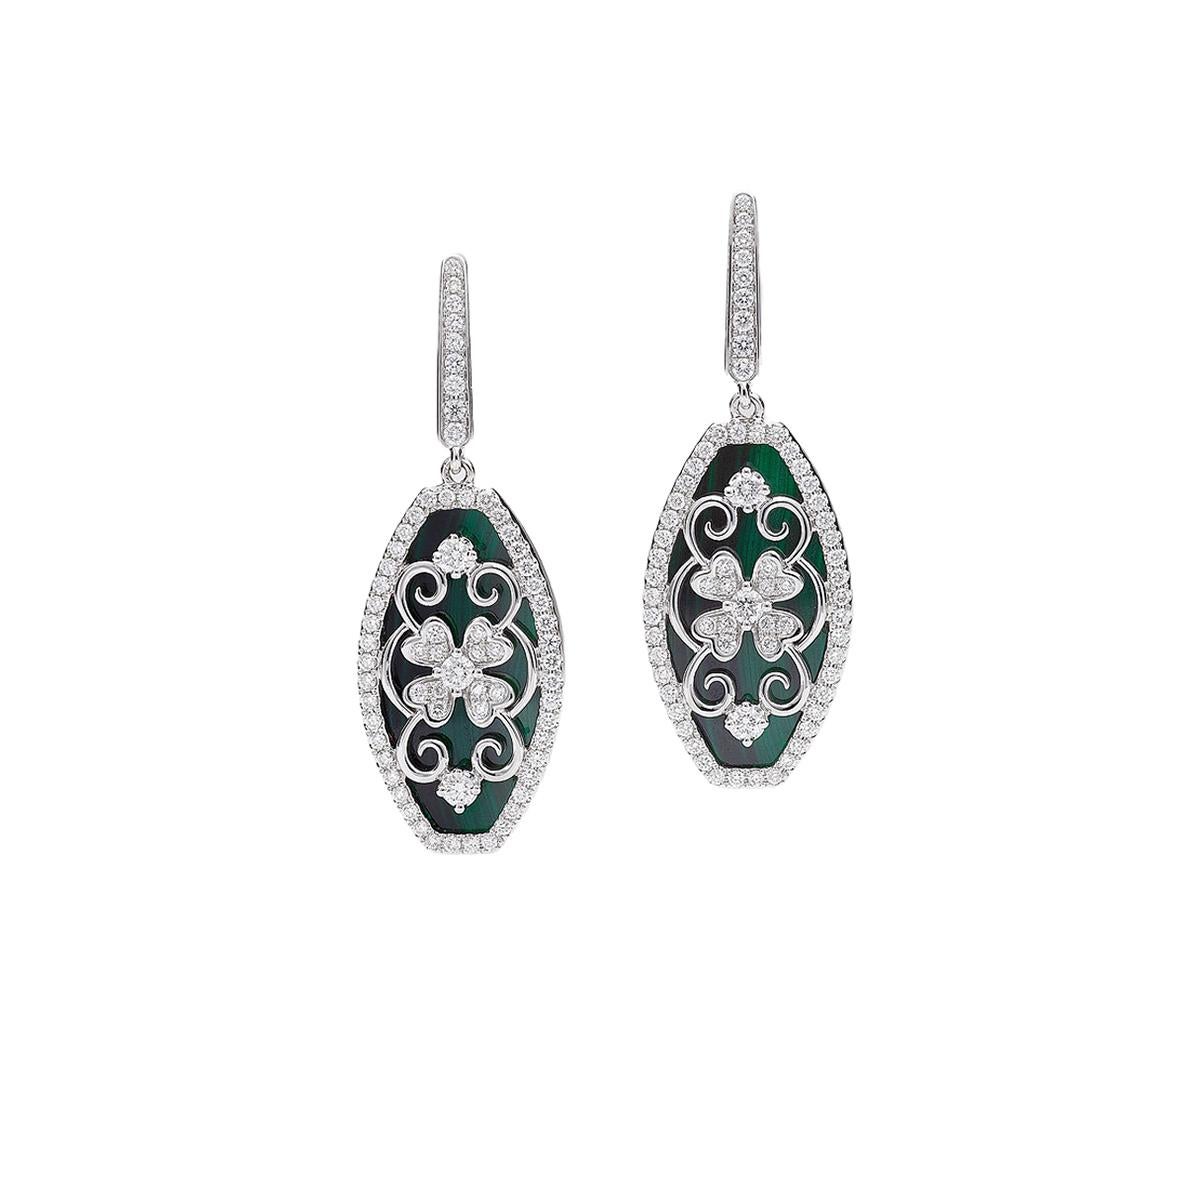 Earrings in 18kt white gold set with 136 diamonds 1.29 cts and 2 malachites 9.12 cts